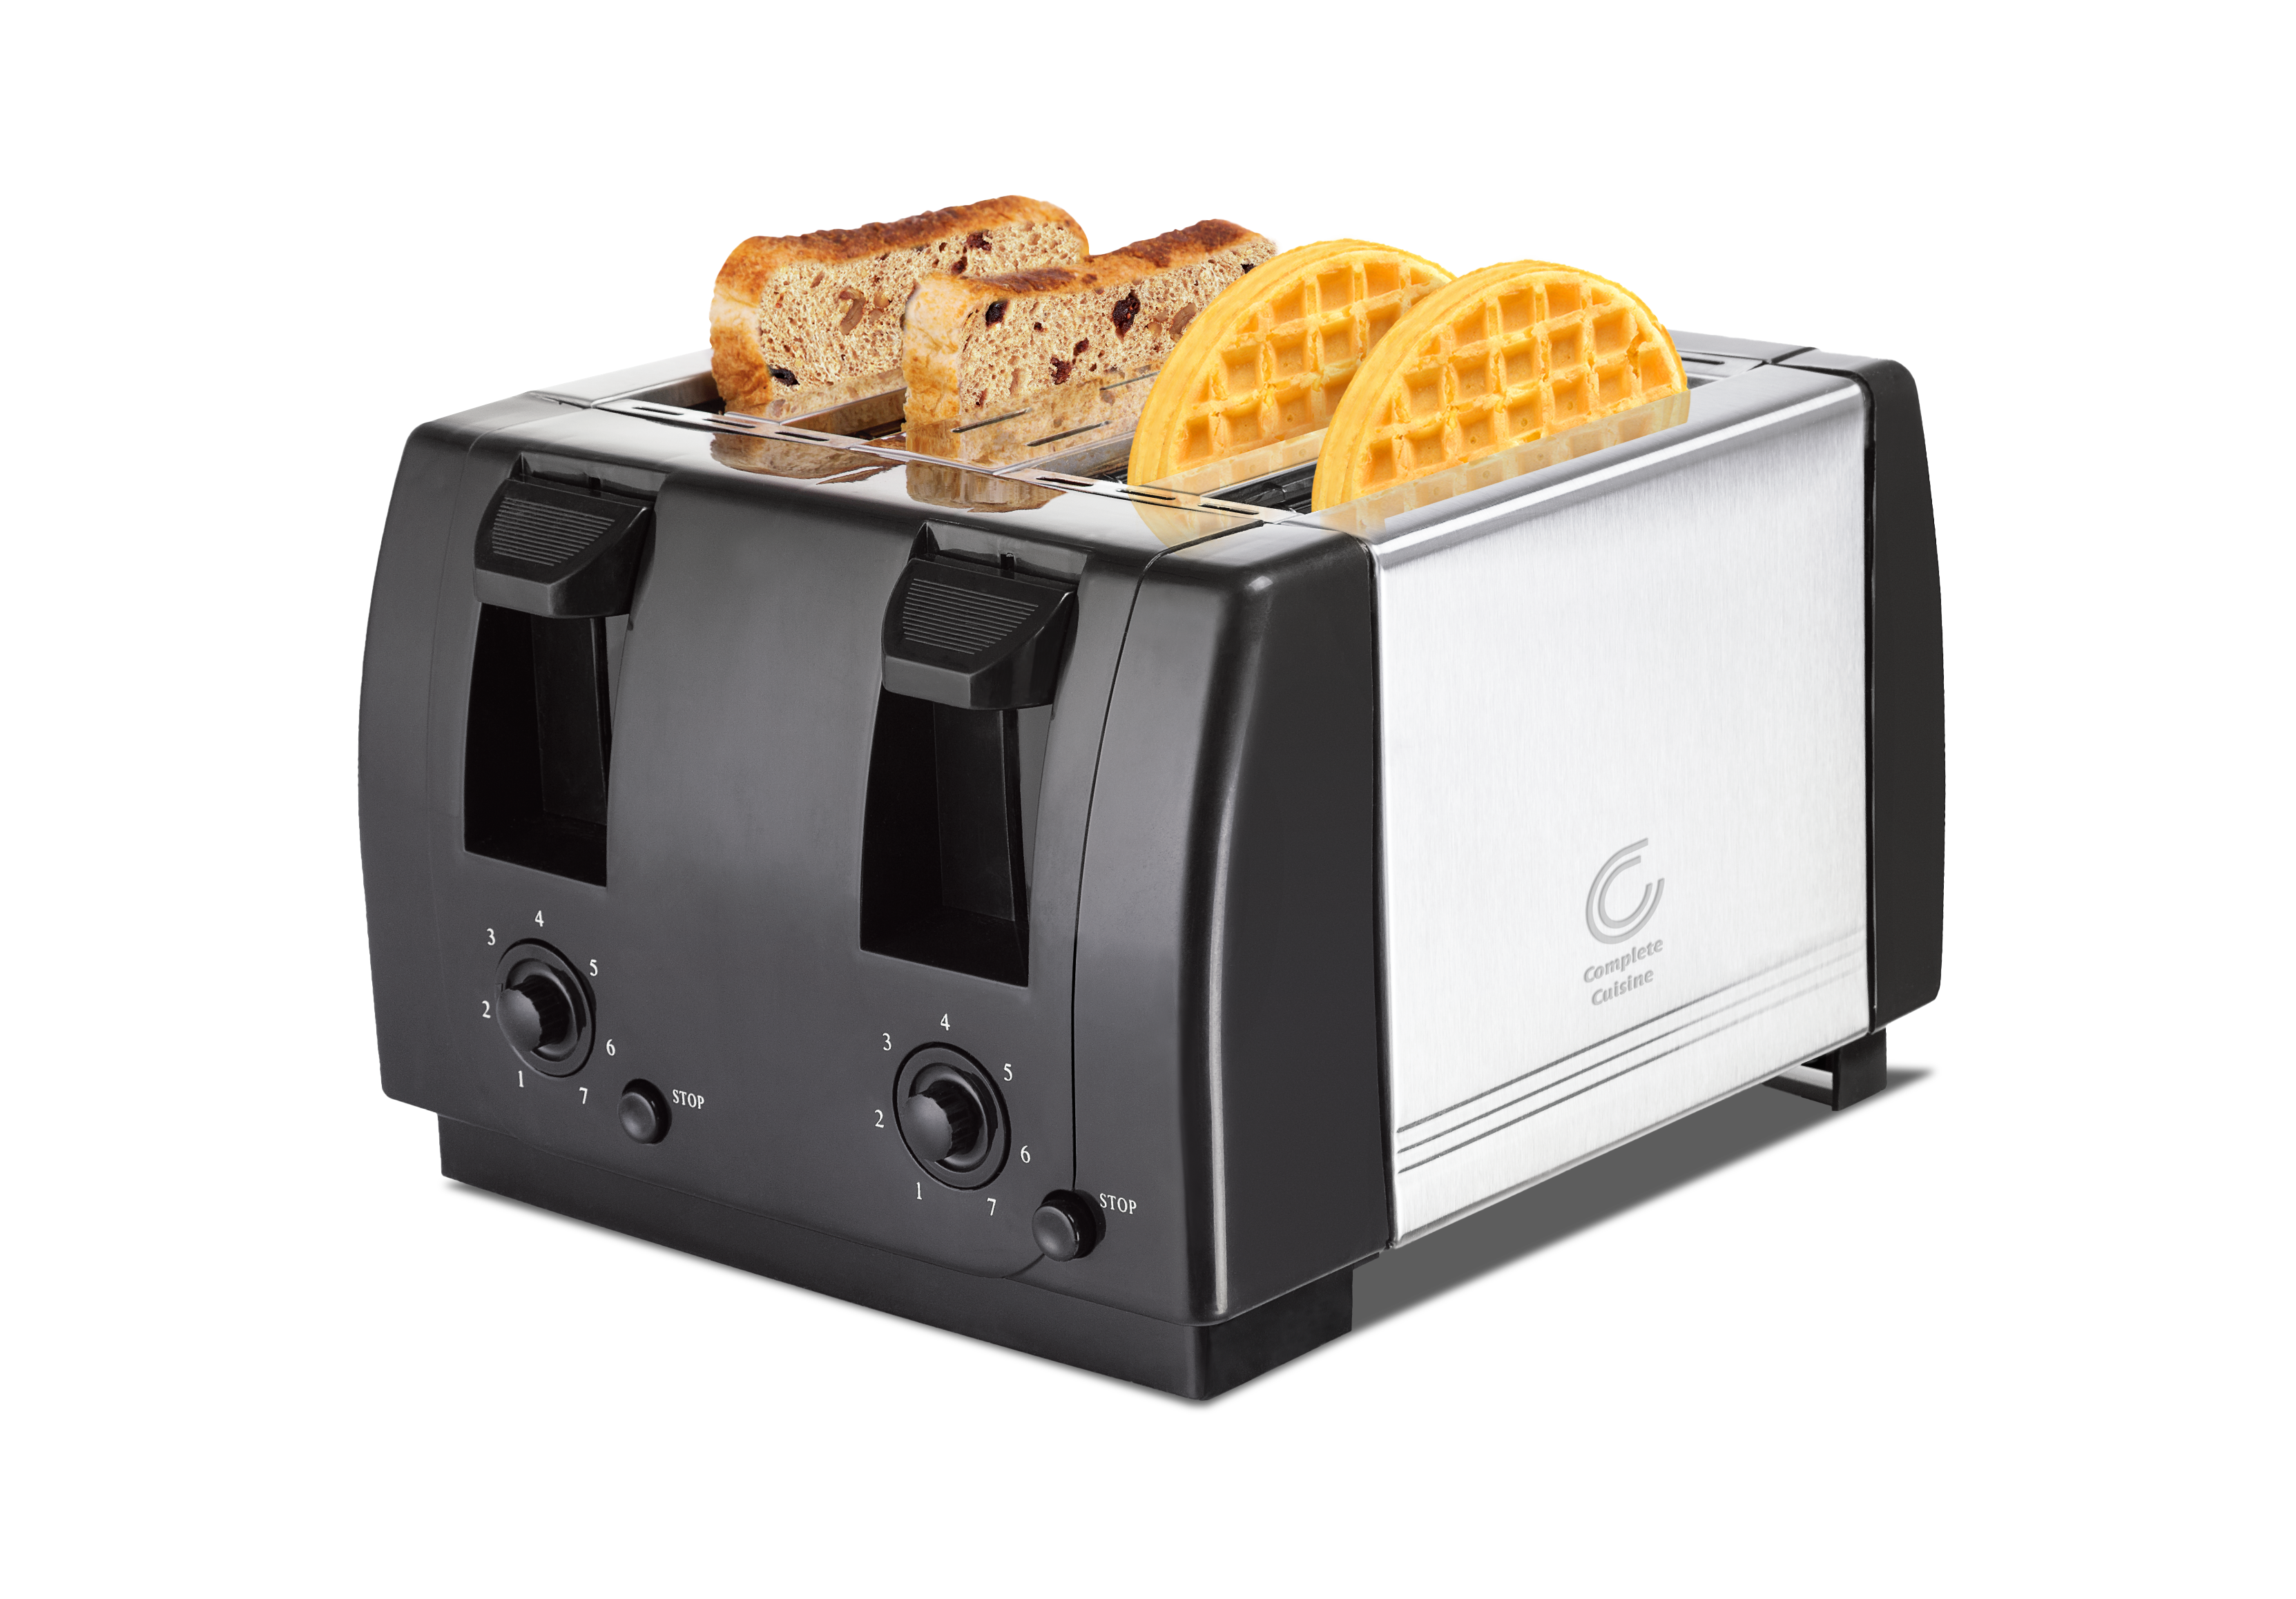 Complete Cuisine 4 Slice Family Size Toaster, Stainless Steel